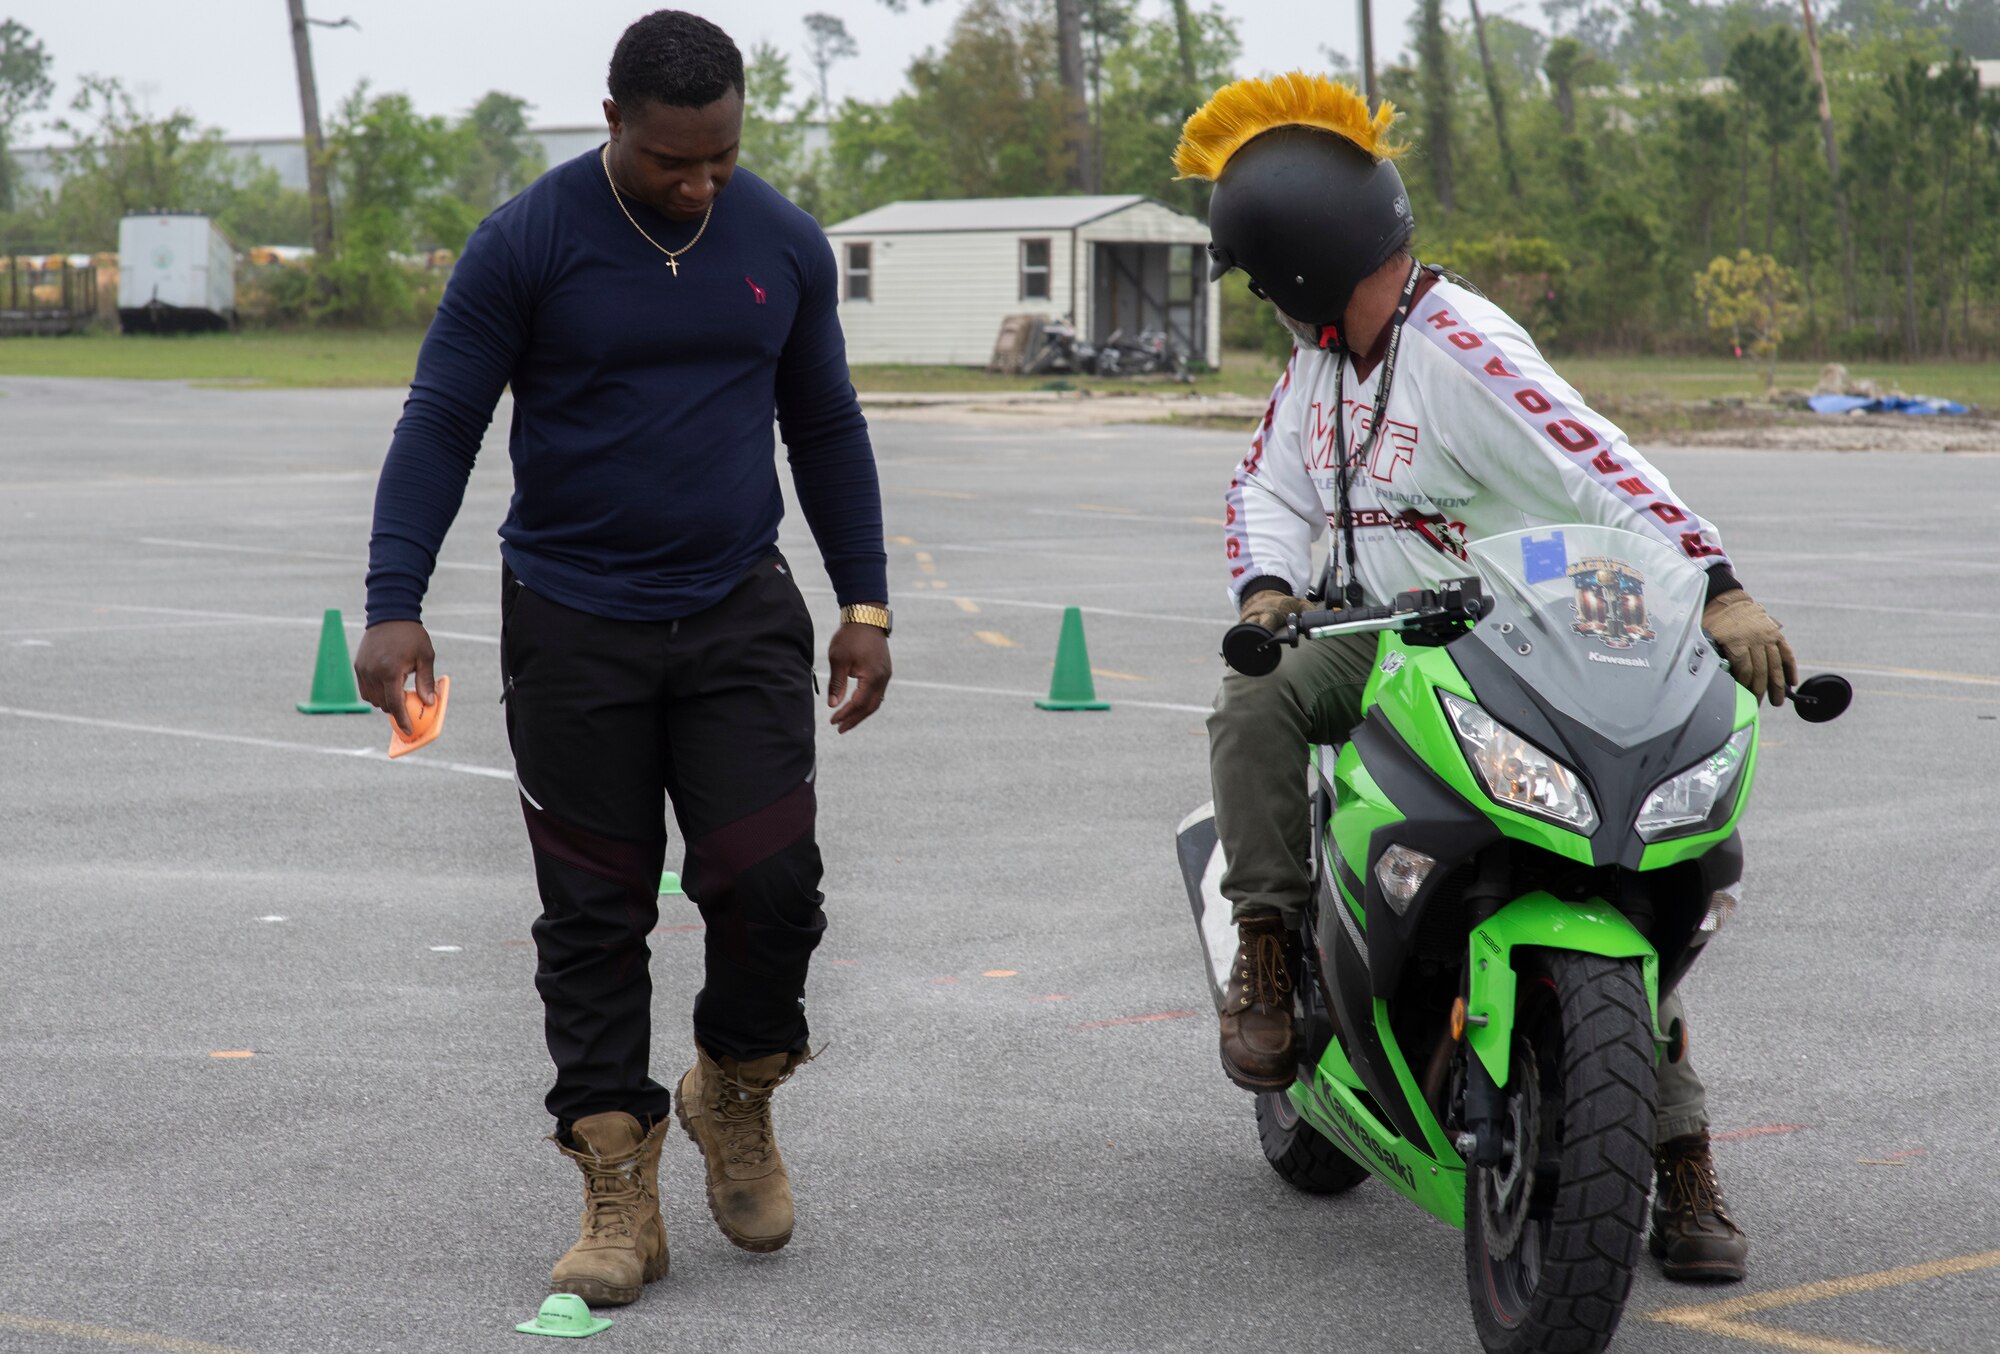 From left, U.S. Air Force Senior Airman Ordavion McChristian, 325th Security Forces Squadron alarm monitor, marks the ground where Shannon Daub, Panama City Motorcycle Training coach, came to a complete stop in Panama City, Florida, April 6, 2022.